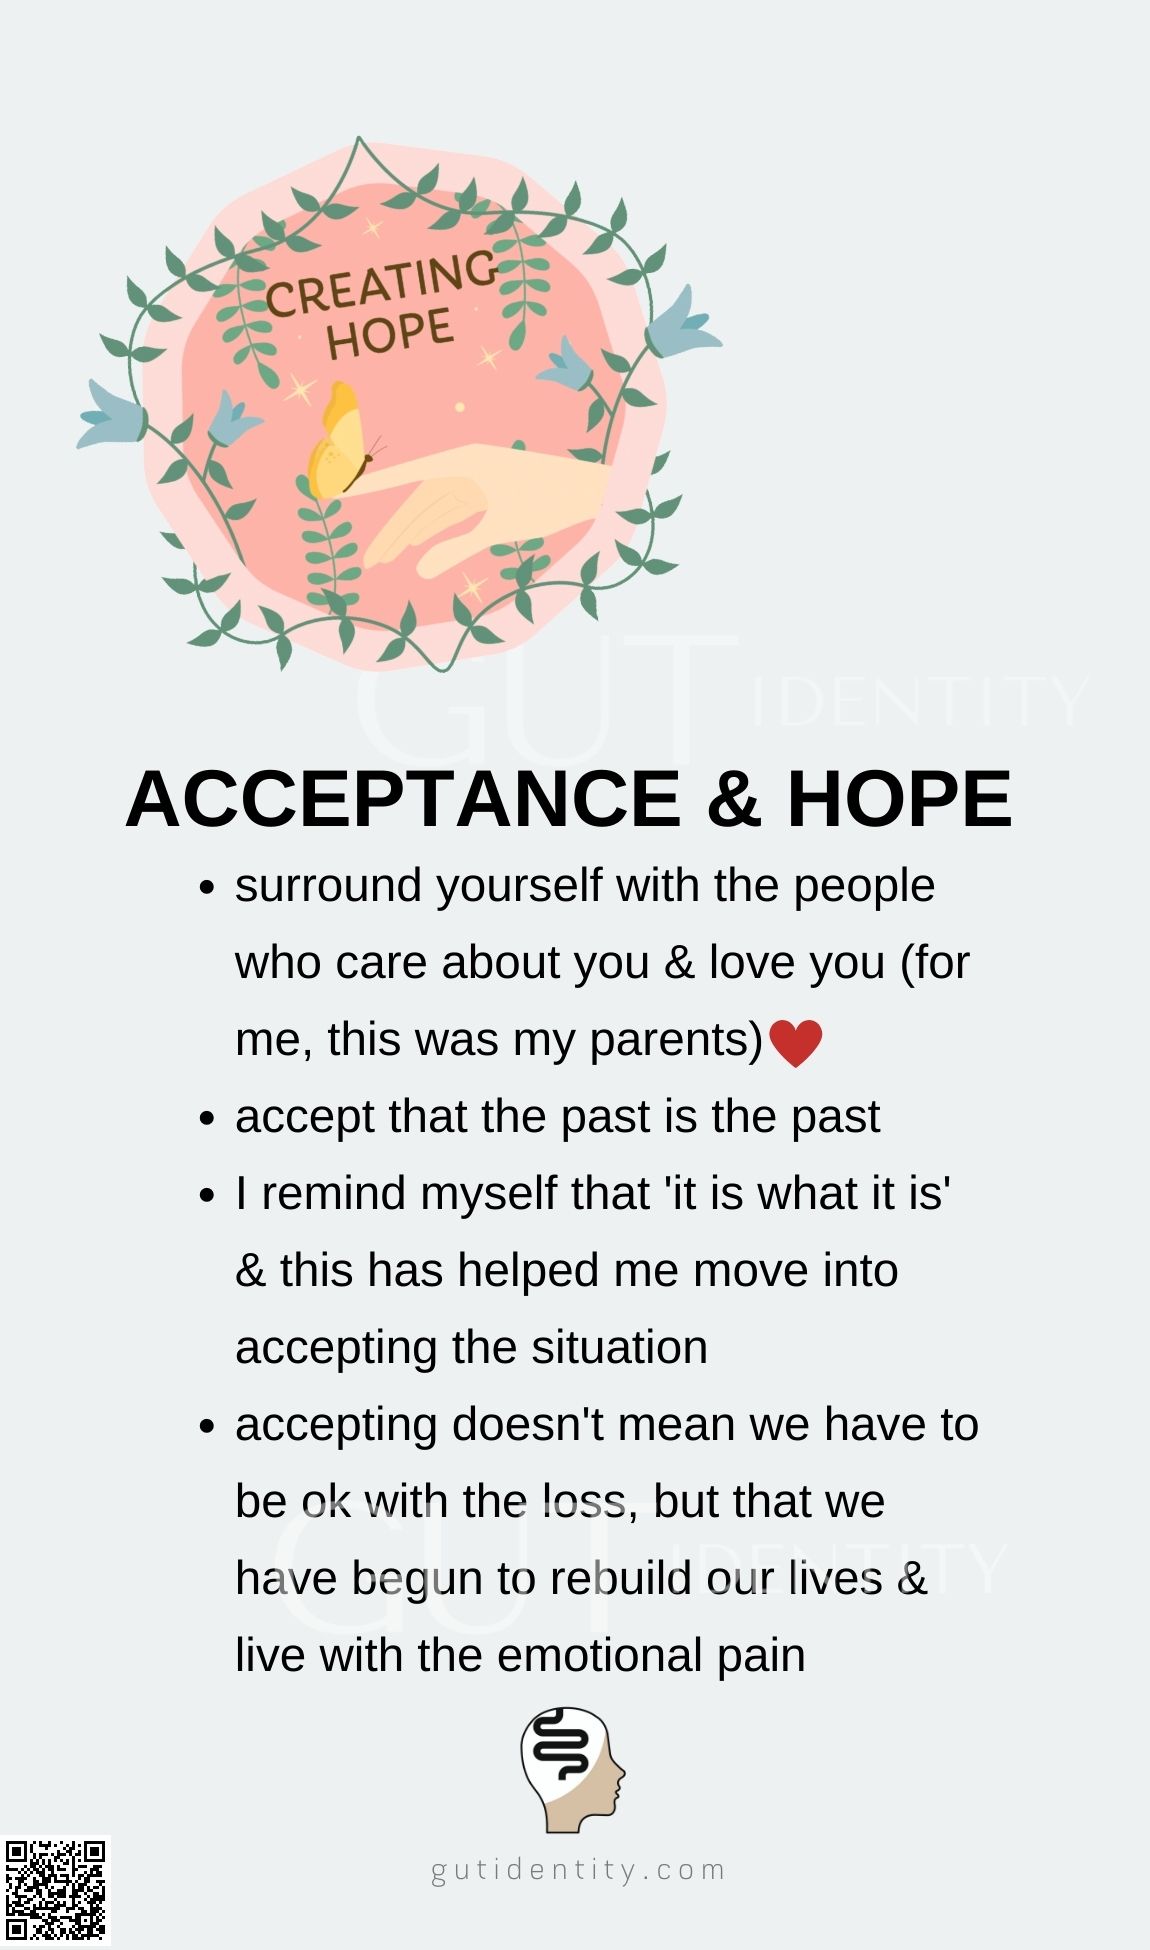 The acceptance and hope stage in grief